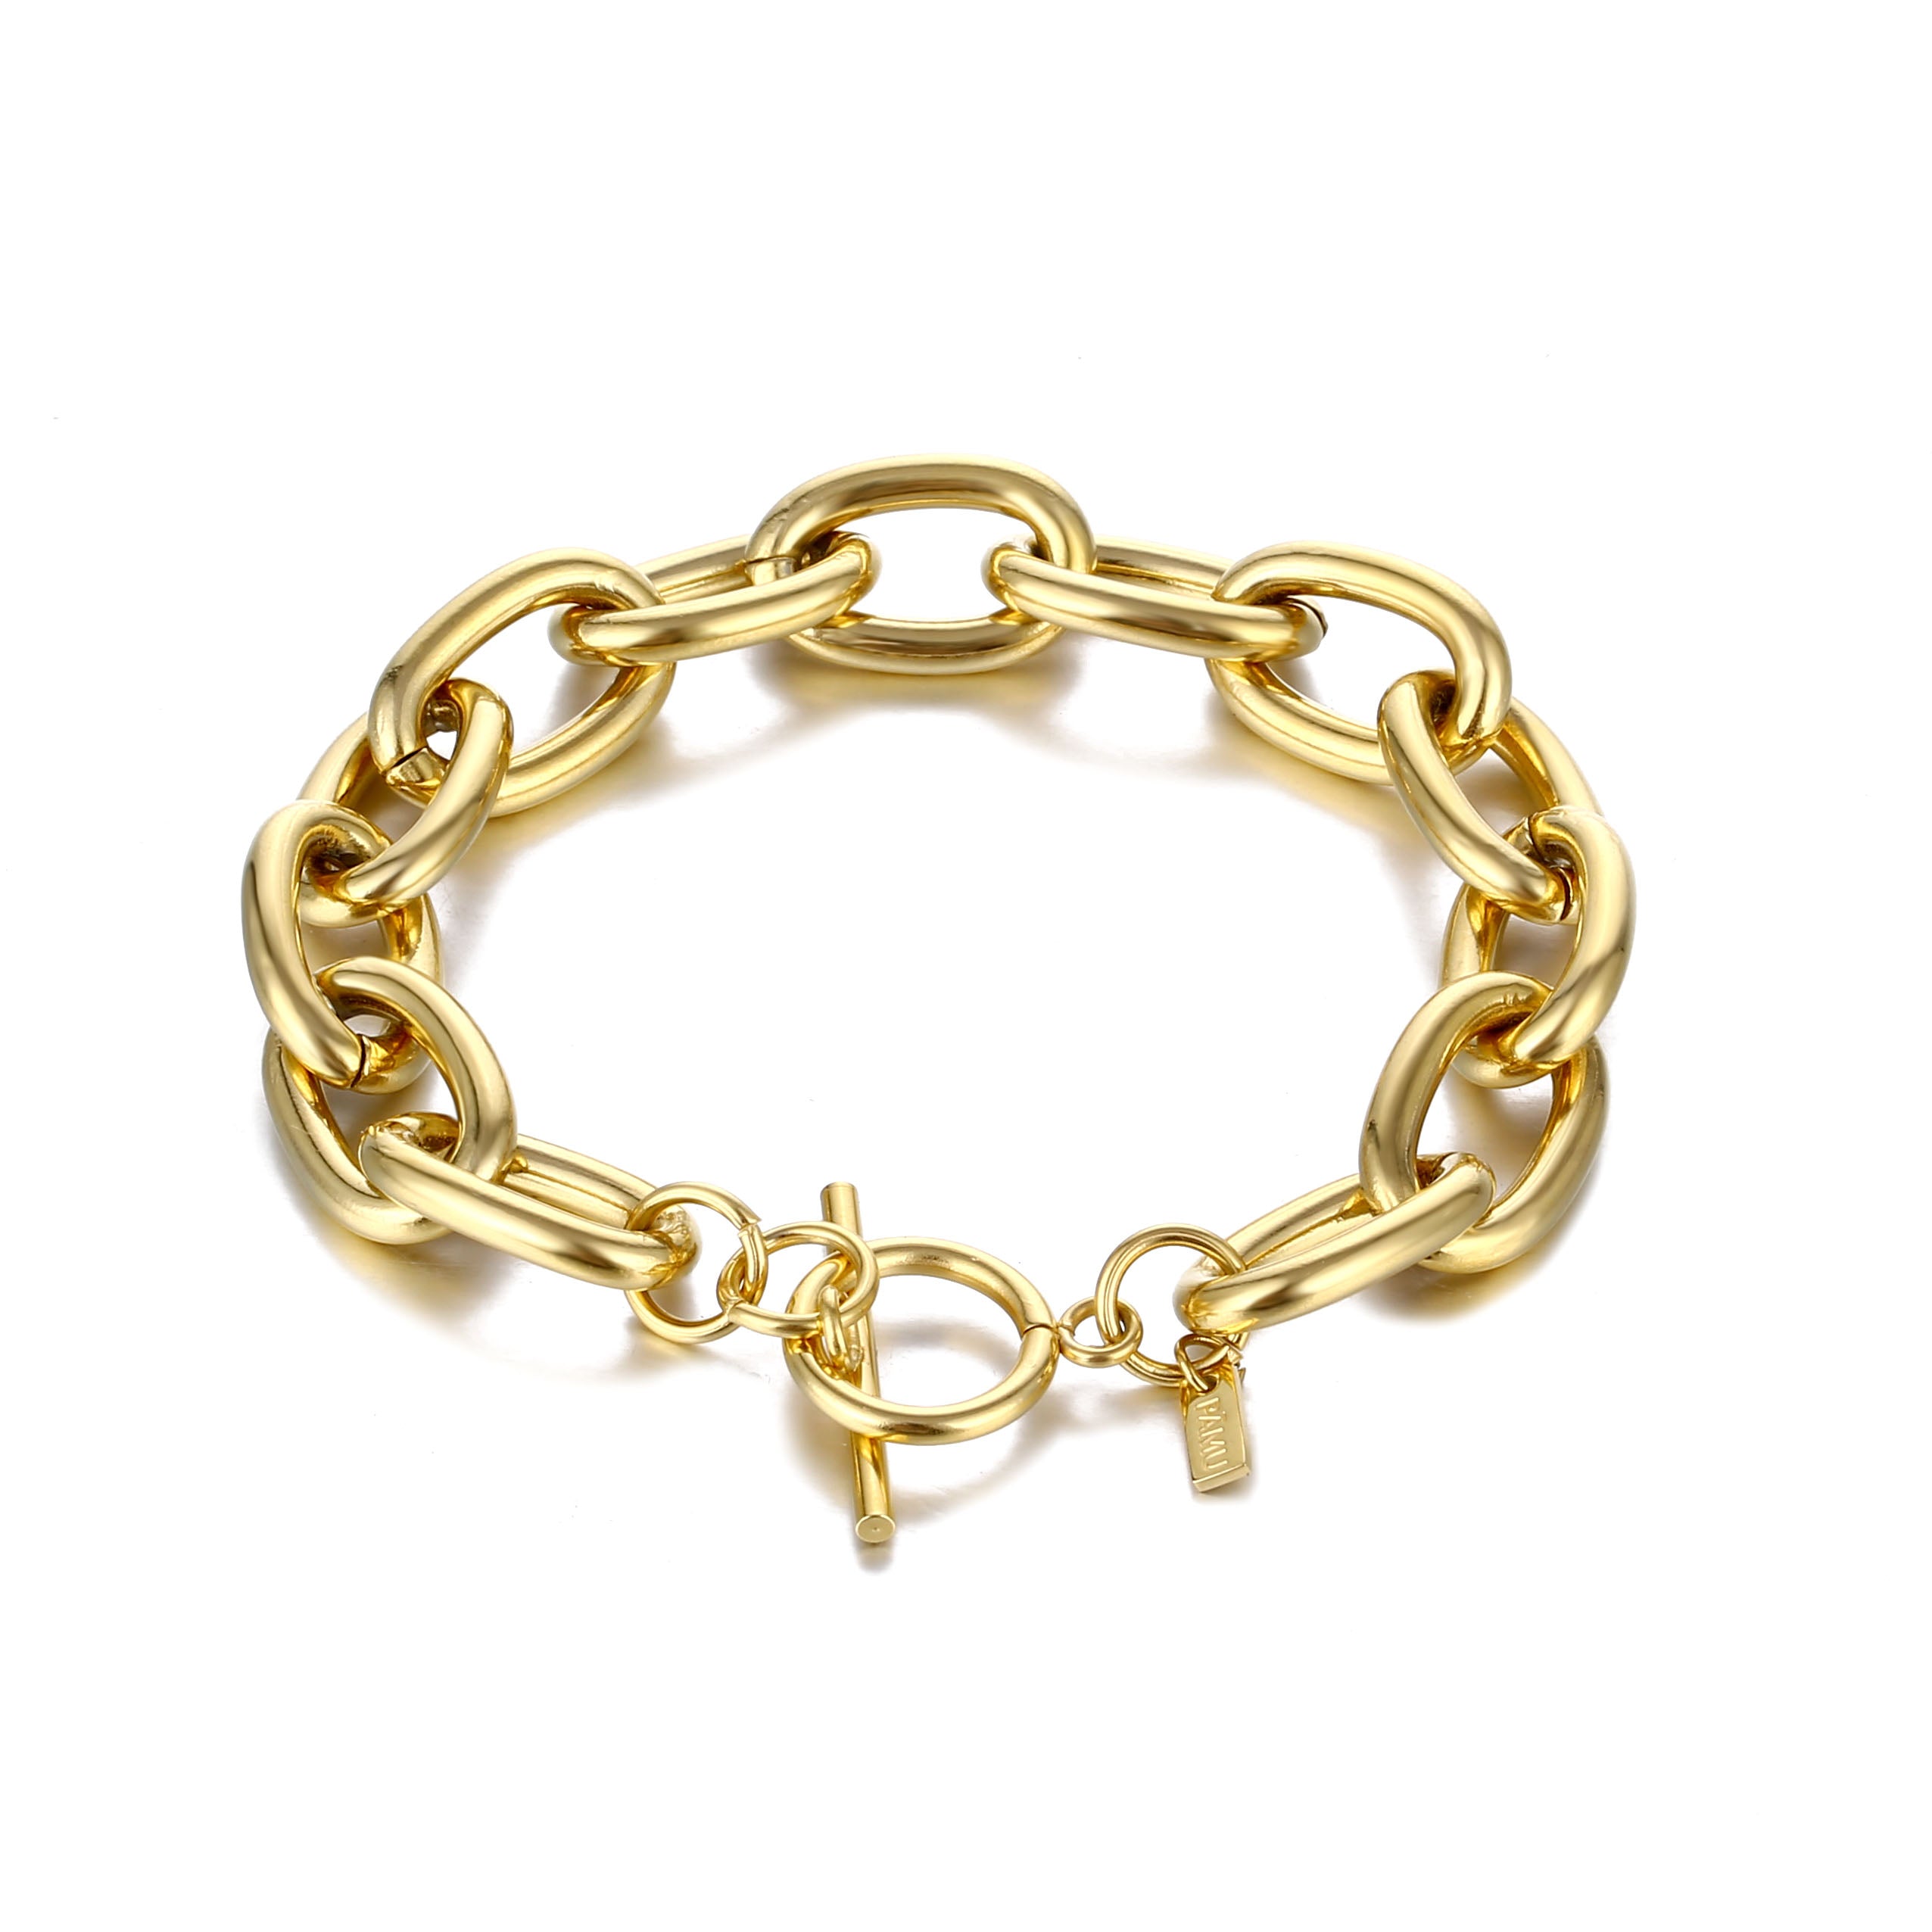 Our Cece bracelet  is such a versatile piece that can be worn for any occasion. Wear yours solo or stacked with some of our other styles. Featuring chunky chain link